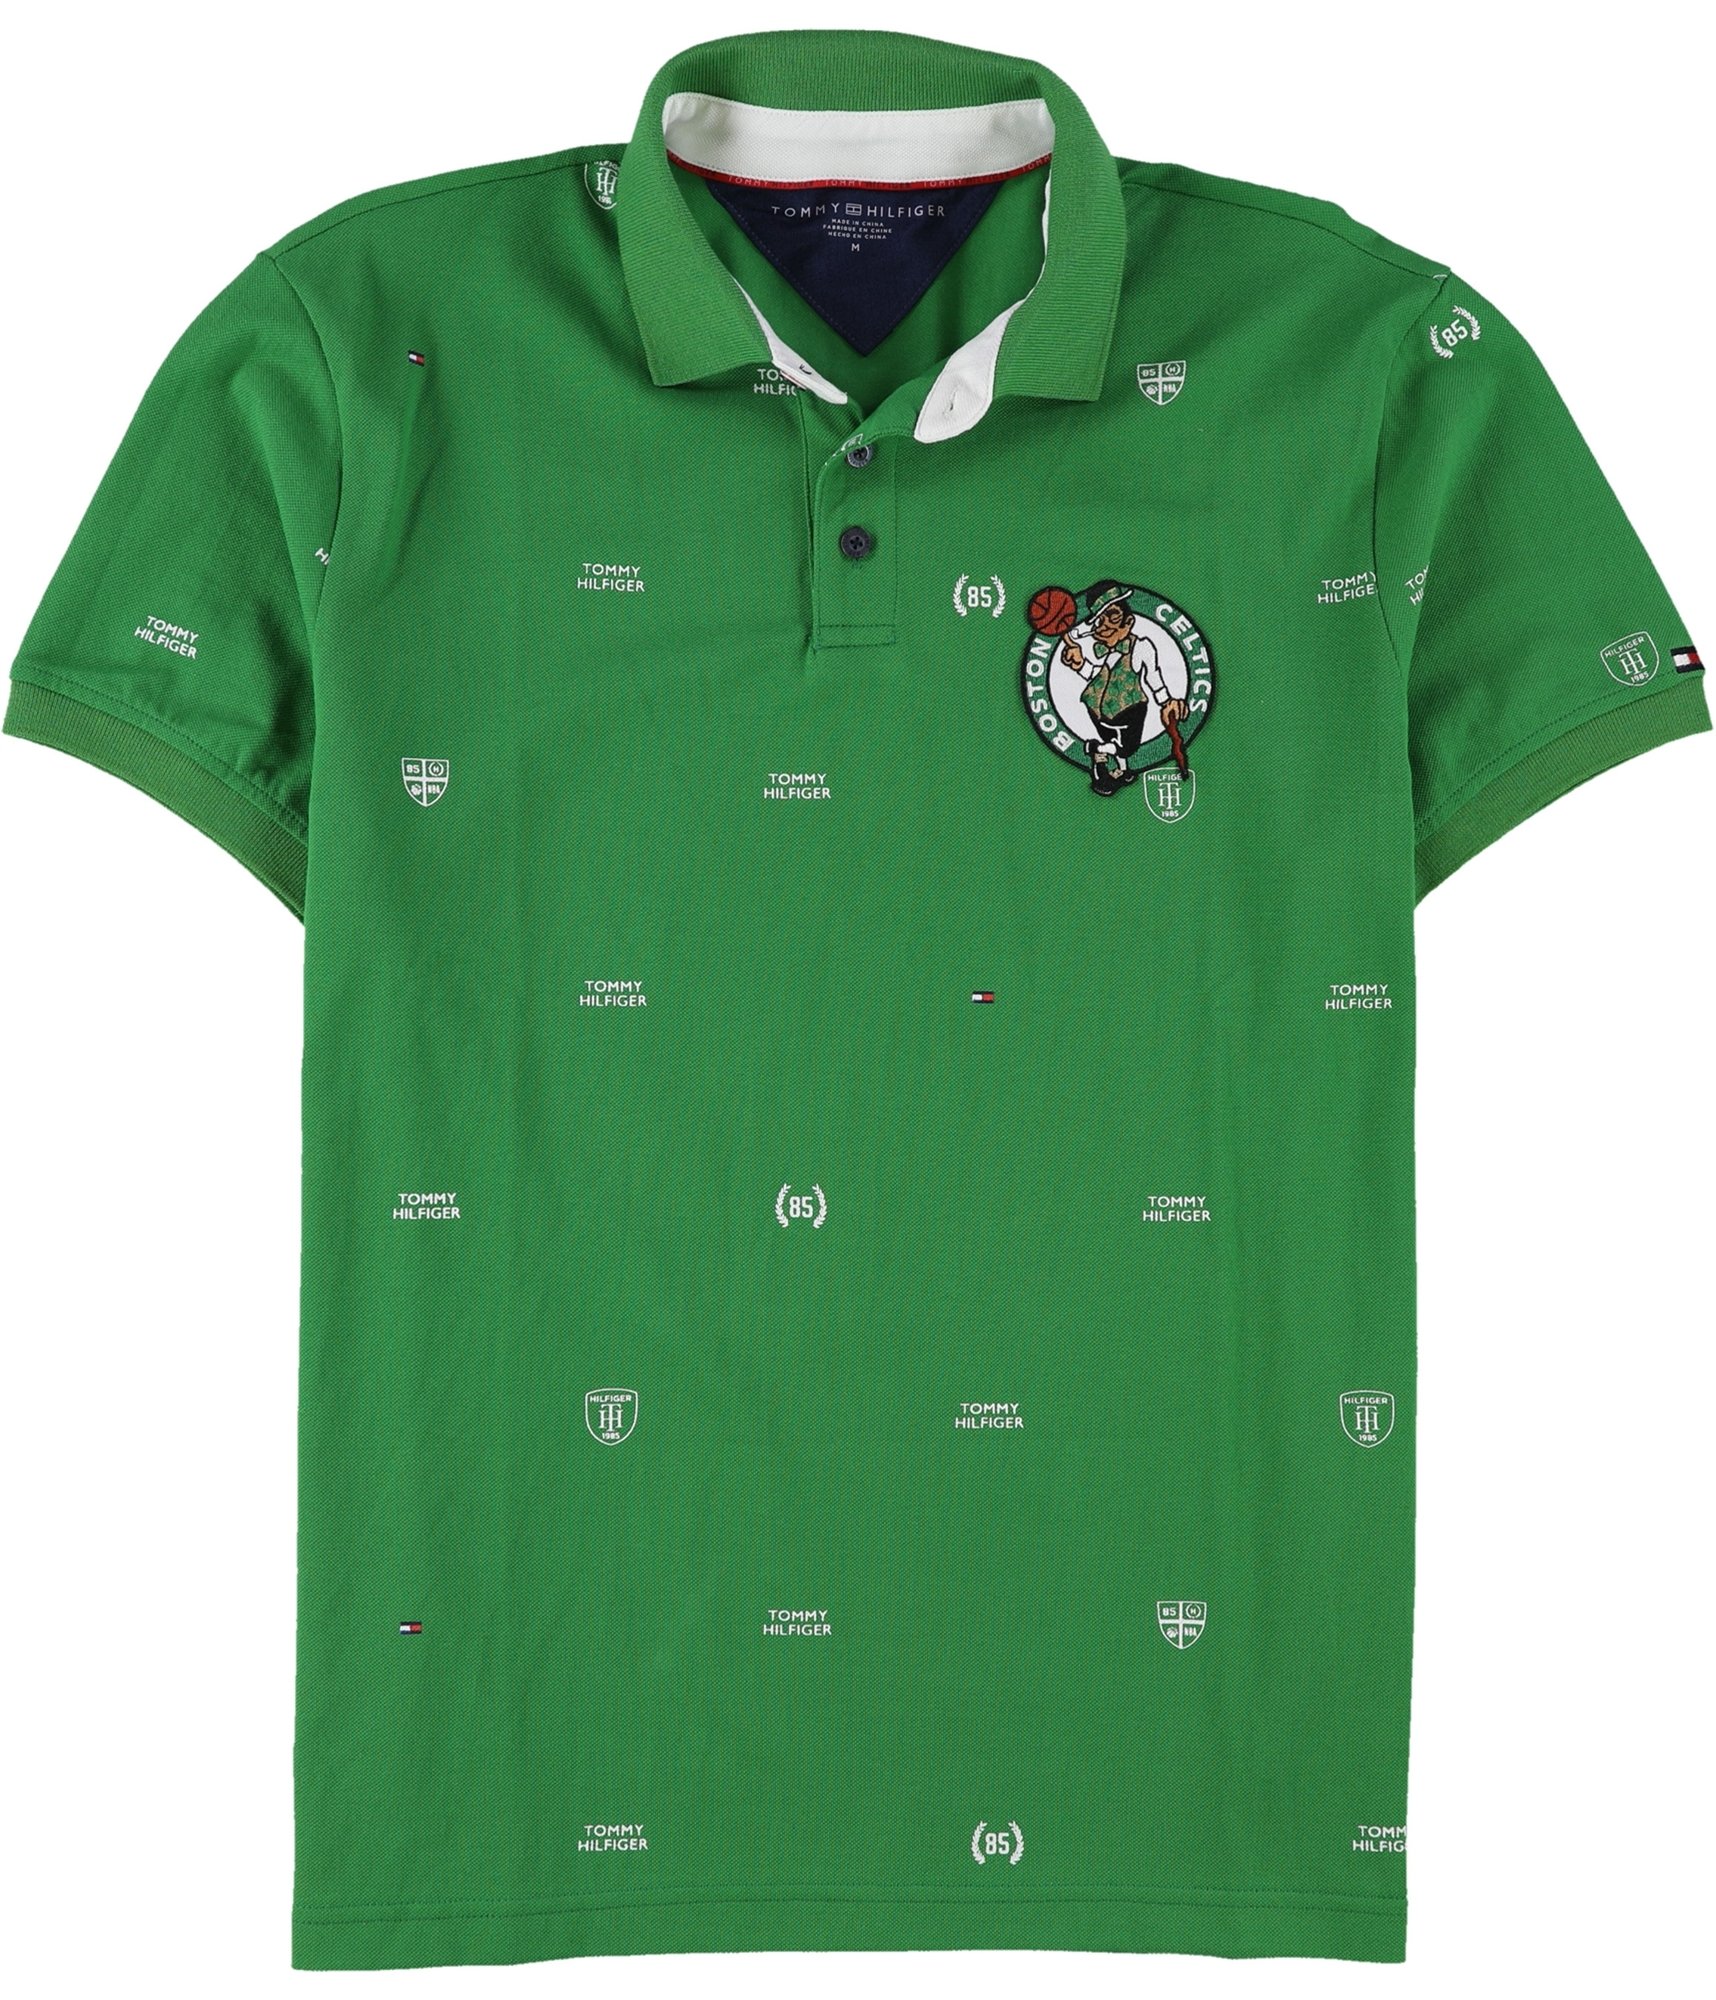 Shinkan Afscheid Beenmerg Buy a Mens Tommy Hilfiger Boston Celtics Rugby Polo Shirt Online |  TagsWeekly.com, TW2